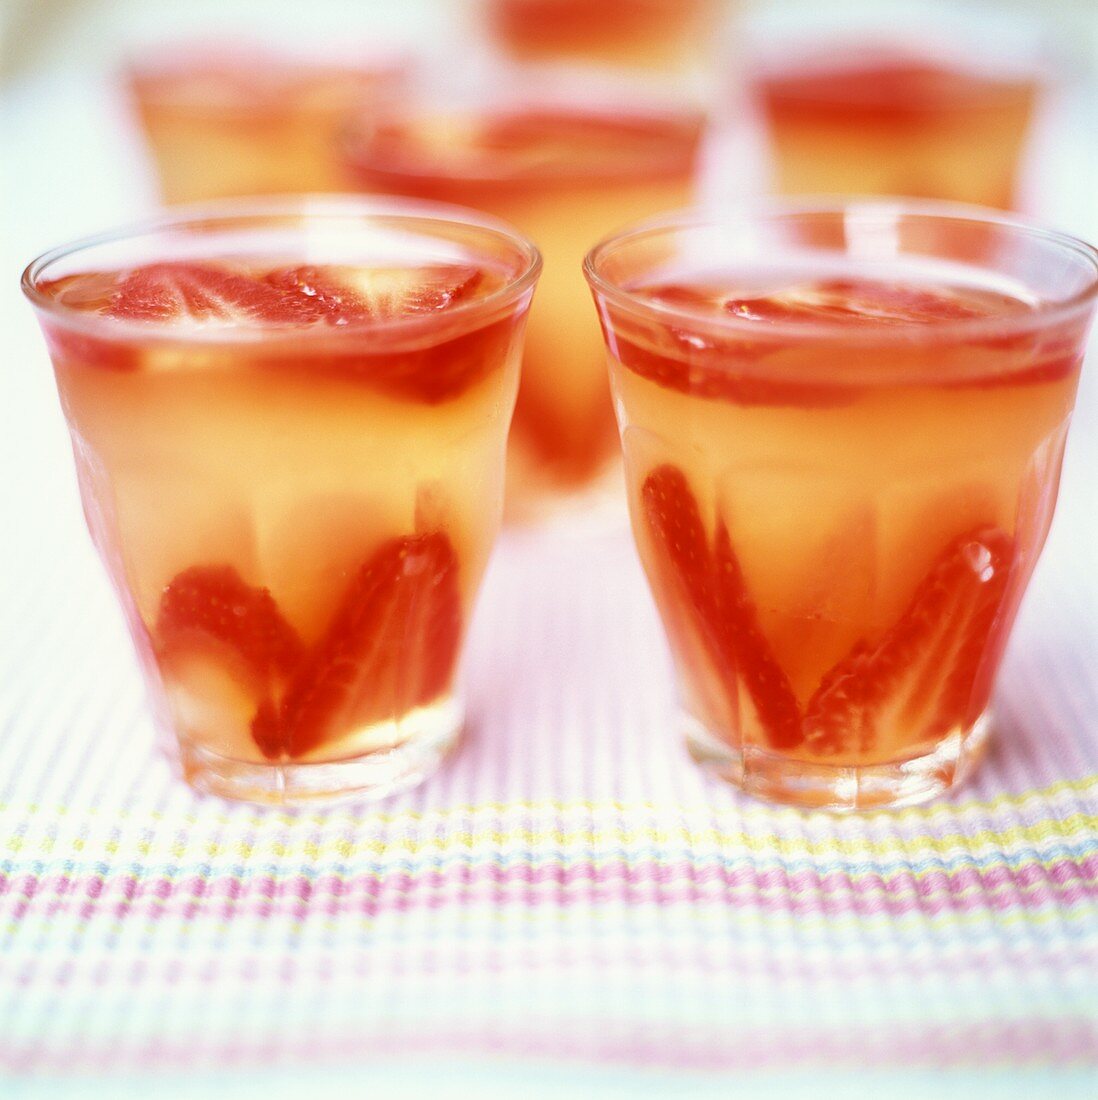 Strawberry and champagne jelly, served in glasses